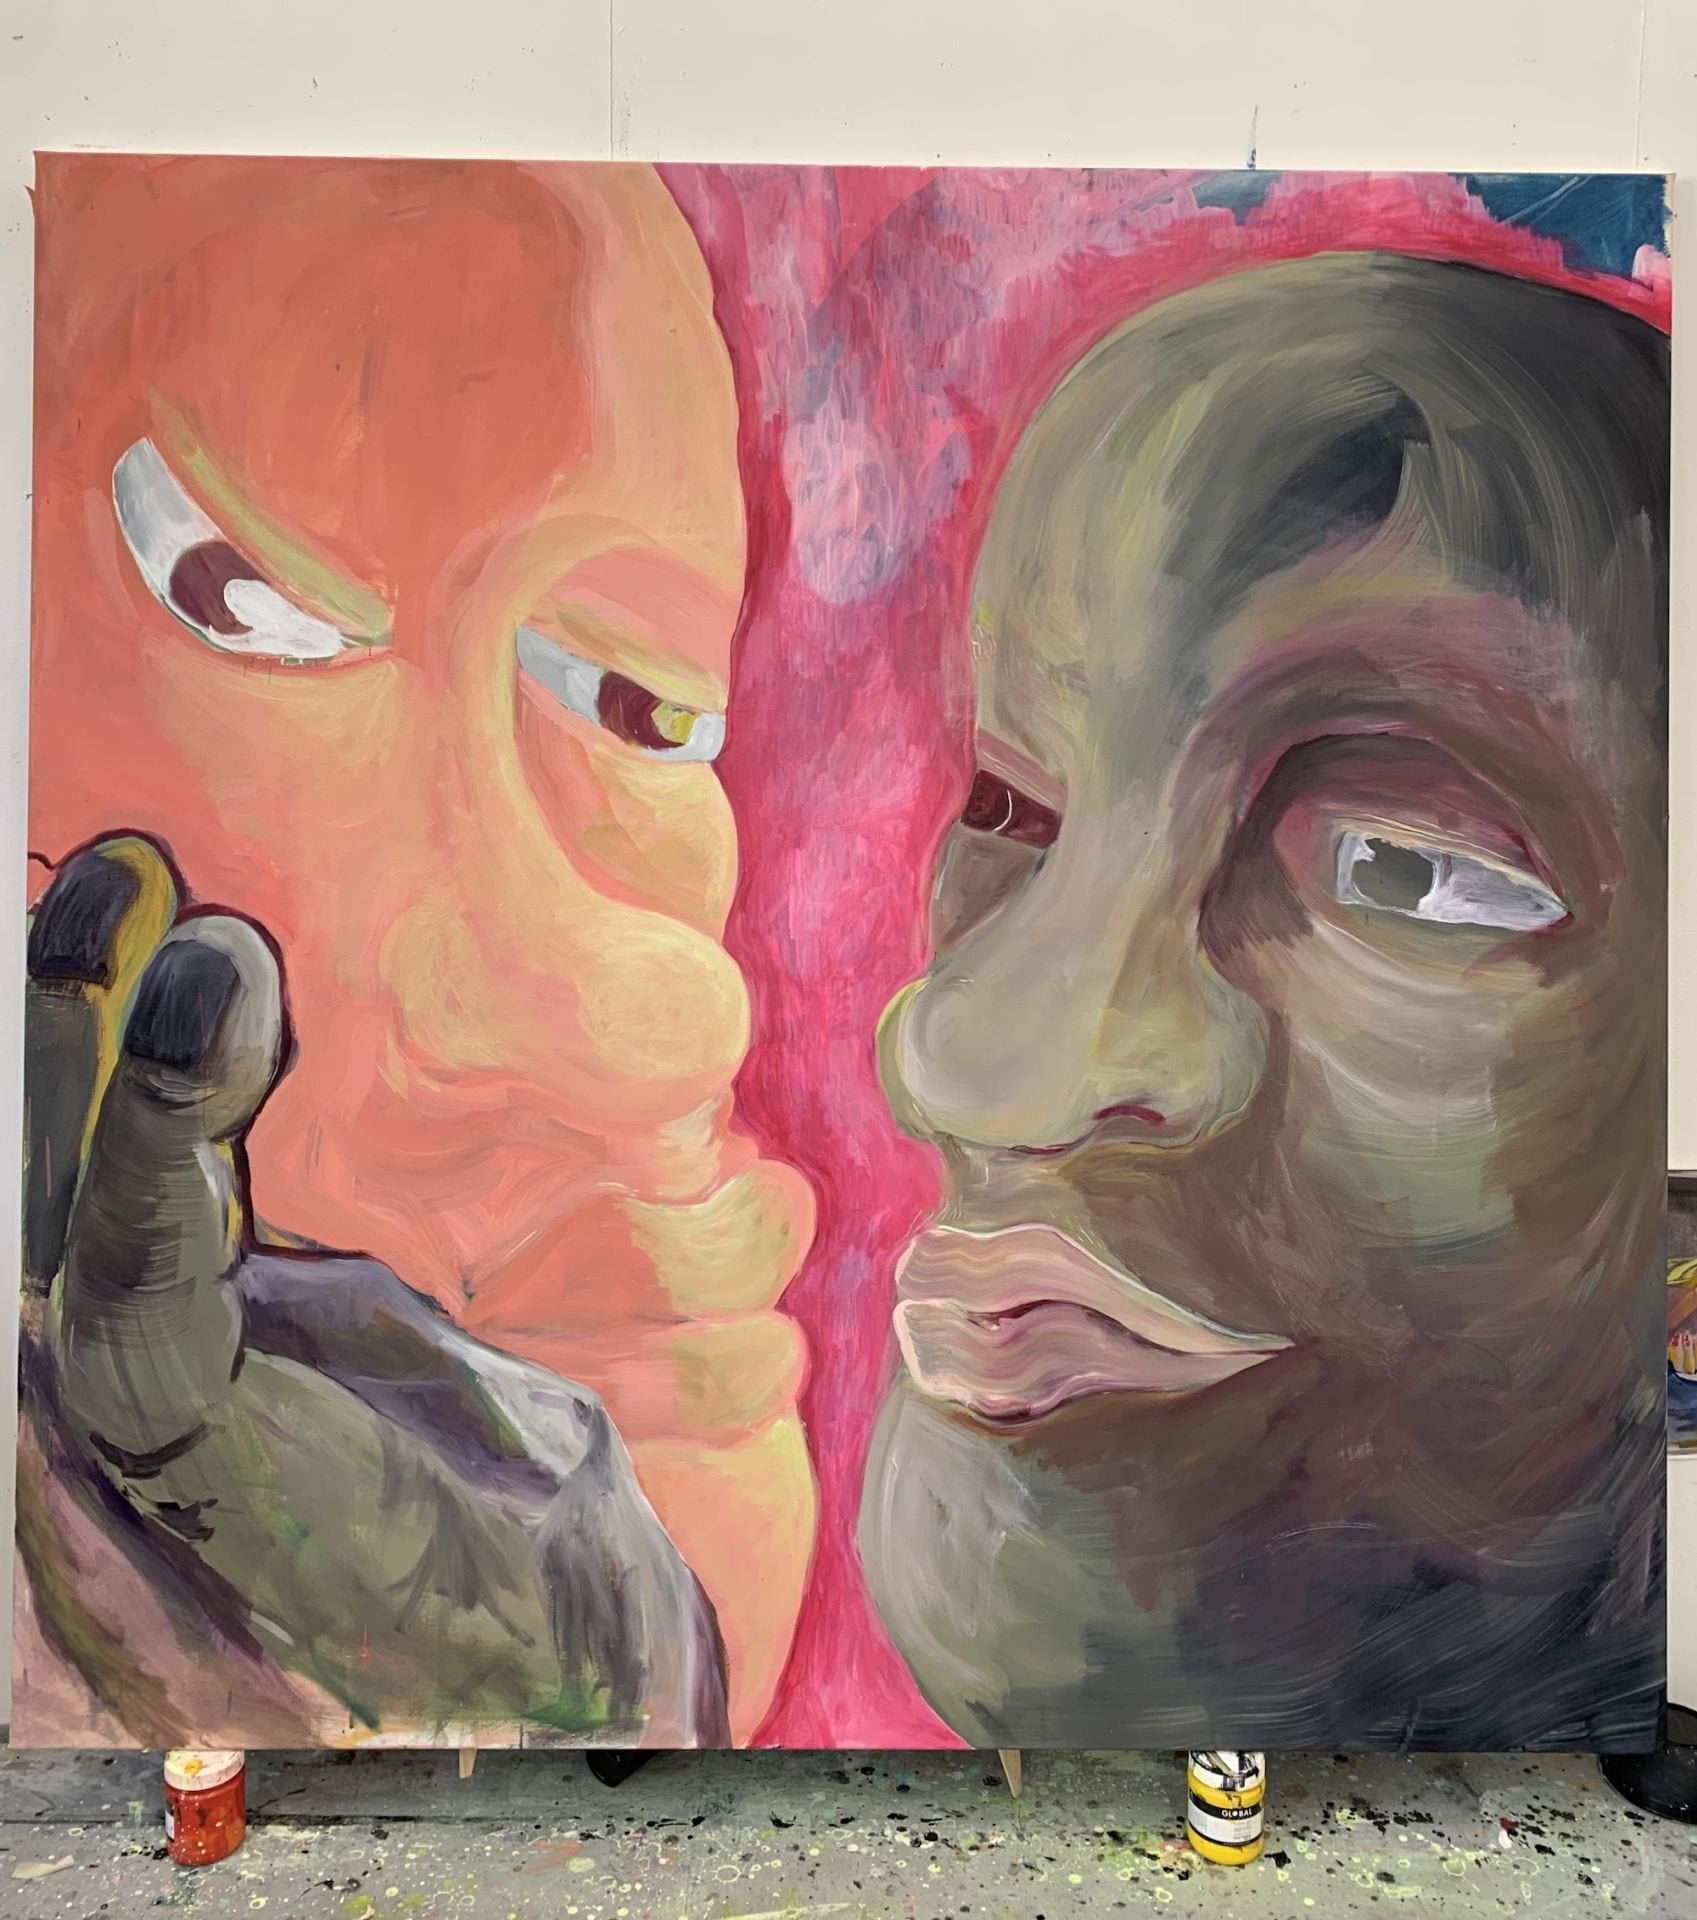 Painting of two people in an embrace - unfinished